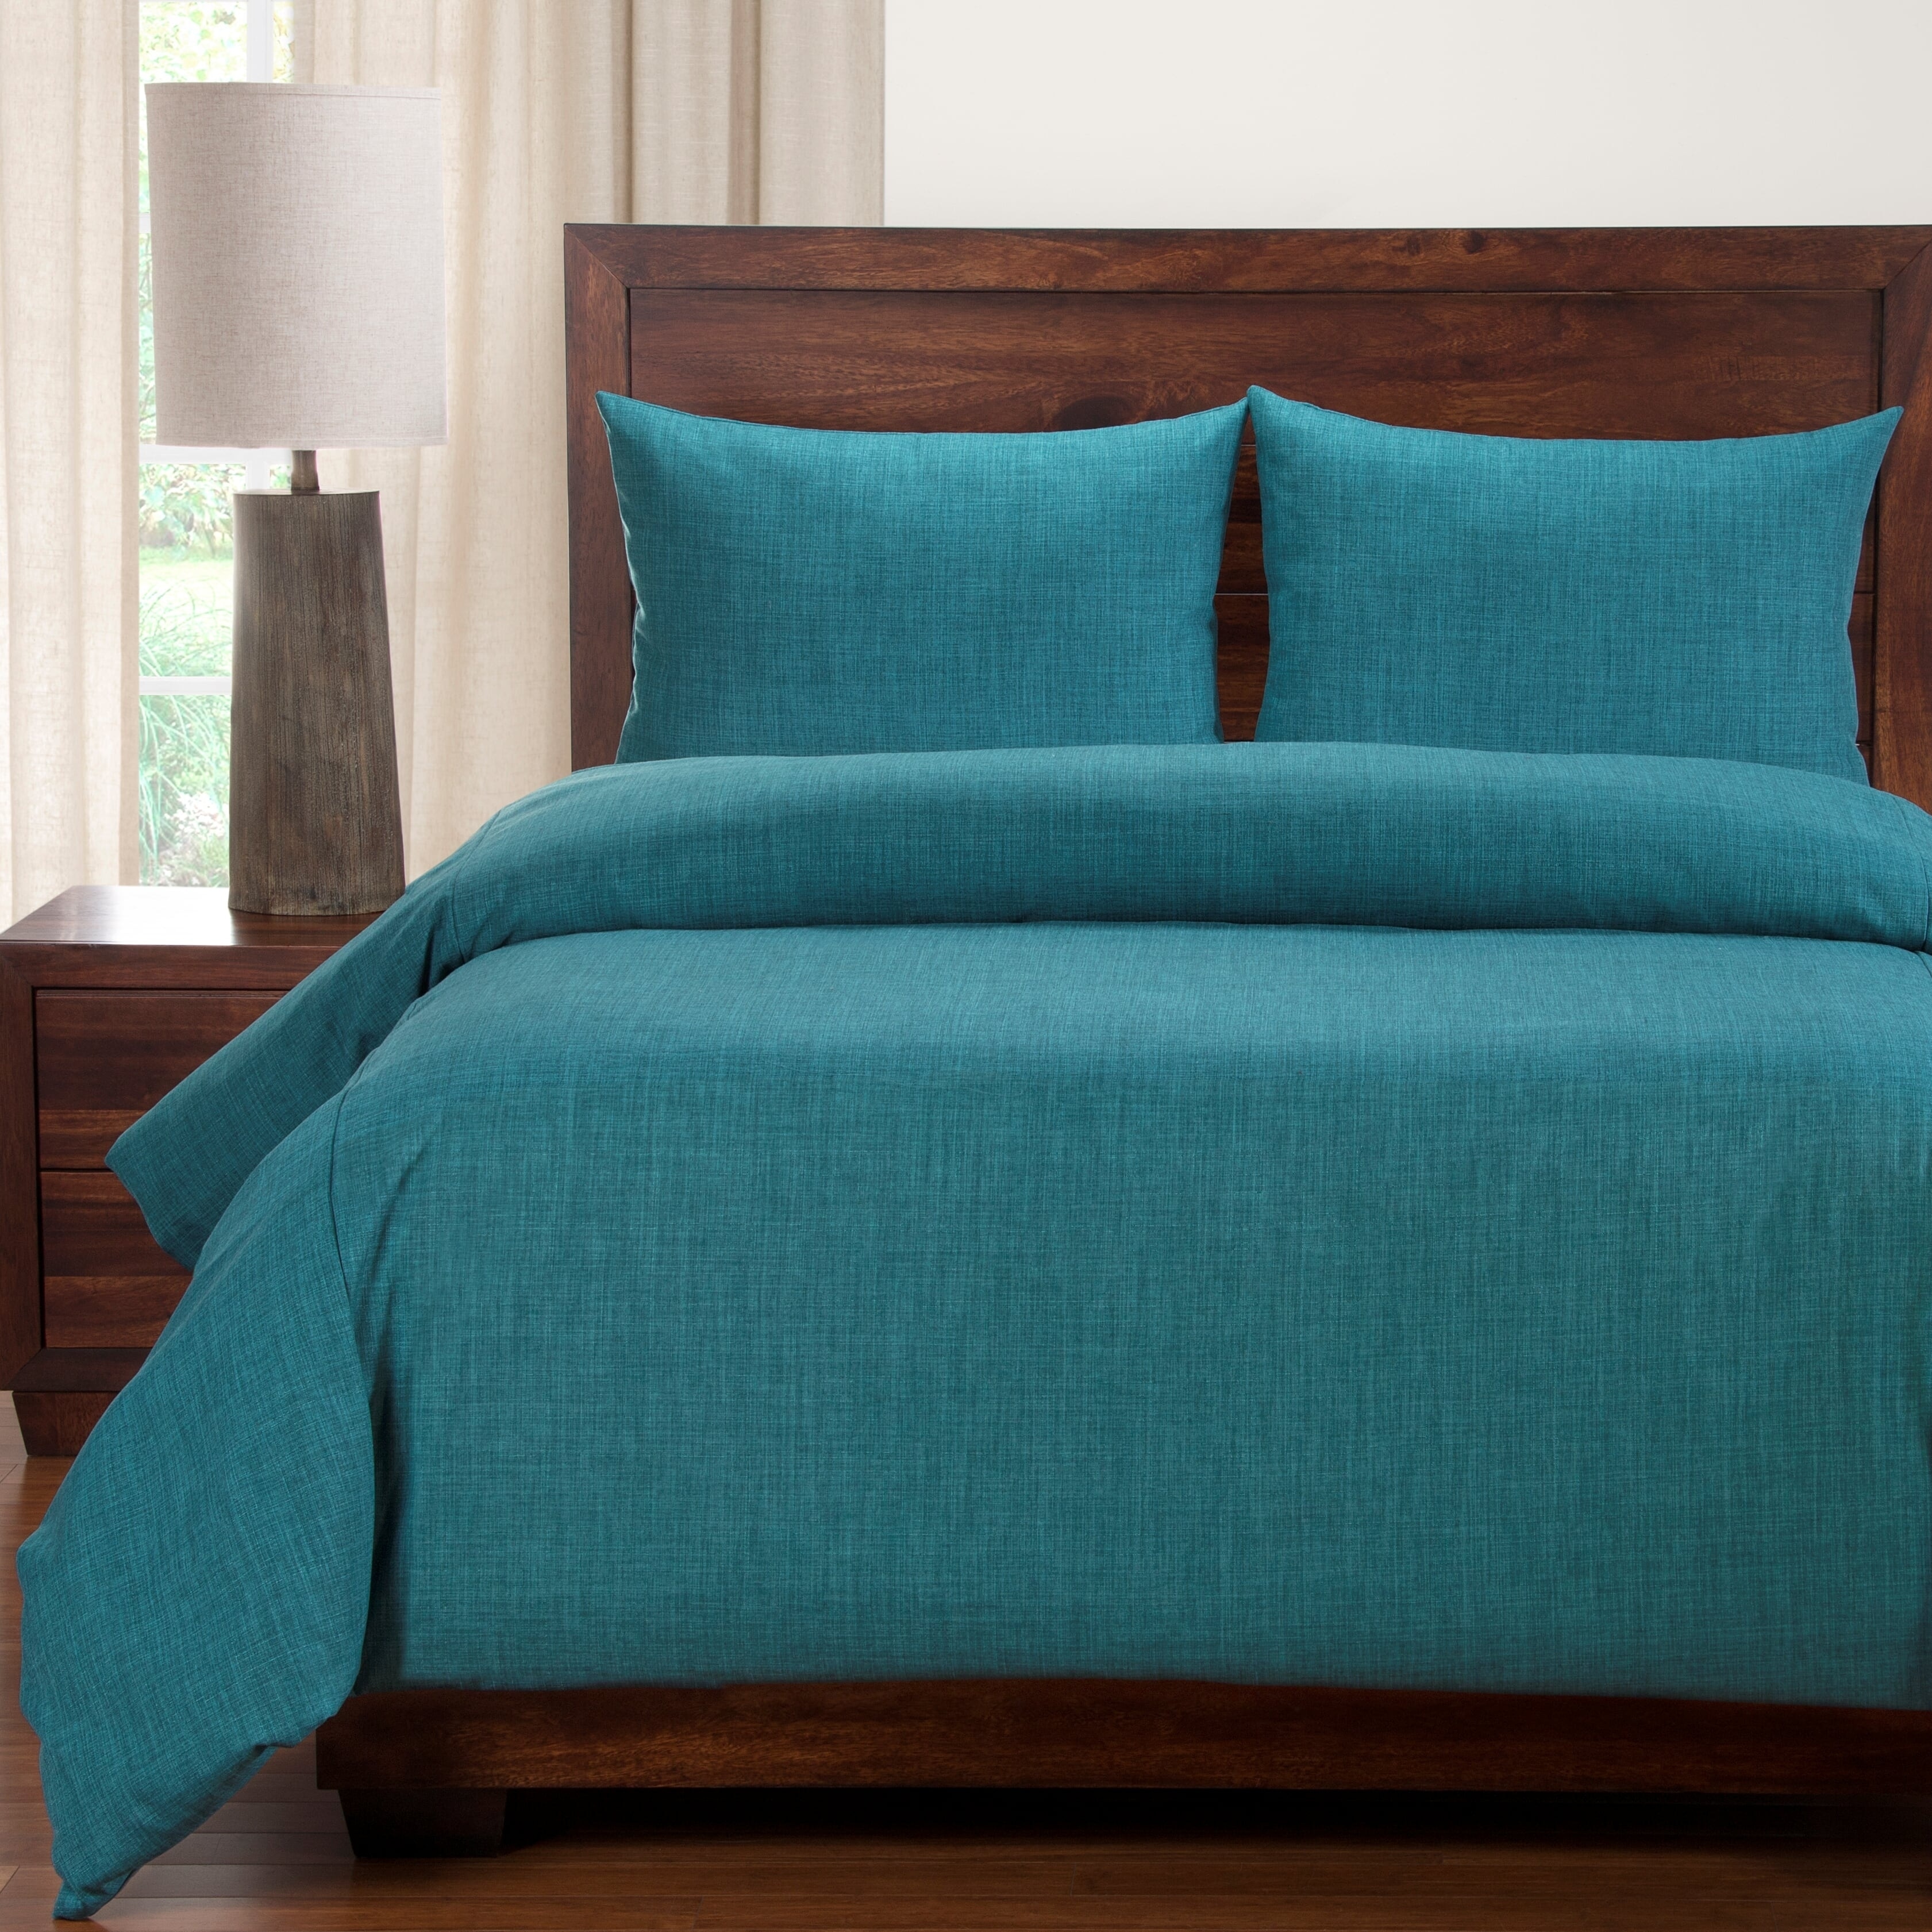 Shop Siscovers Memphis Teal 6 Piece Luxury Duvet And Comforter